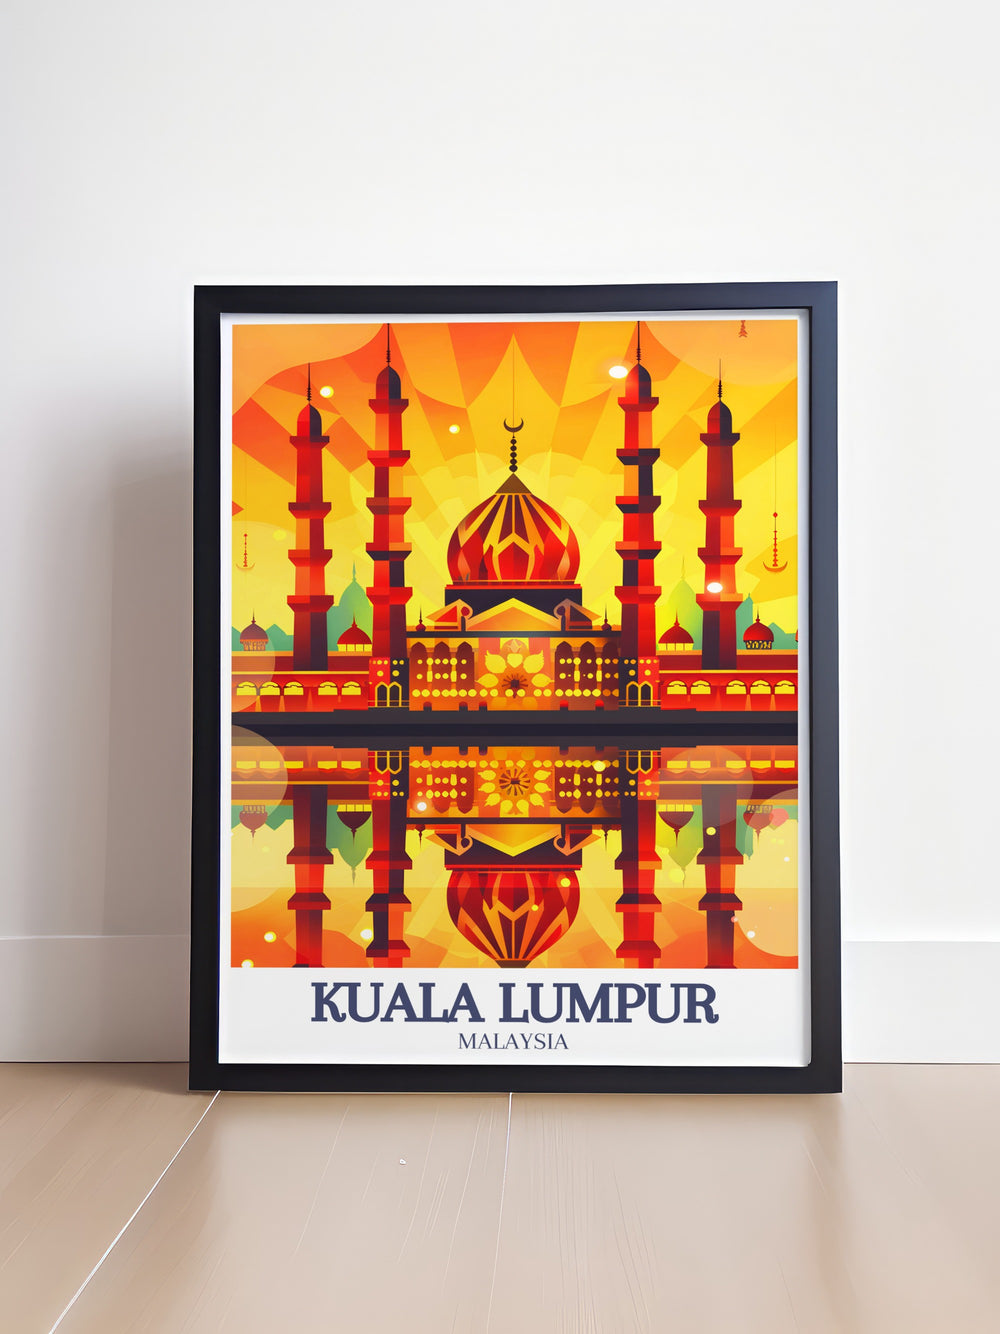 Malaysia wall art of Sultan Salahuddin Abdul Aziz Mosque in Shah Alam ideal for those who love Kuala Lumpur design. This poster of Malaysia adds a touch of cultural sophistication to your decor.